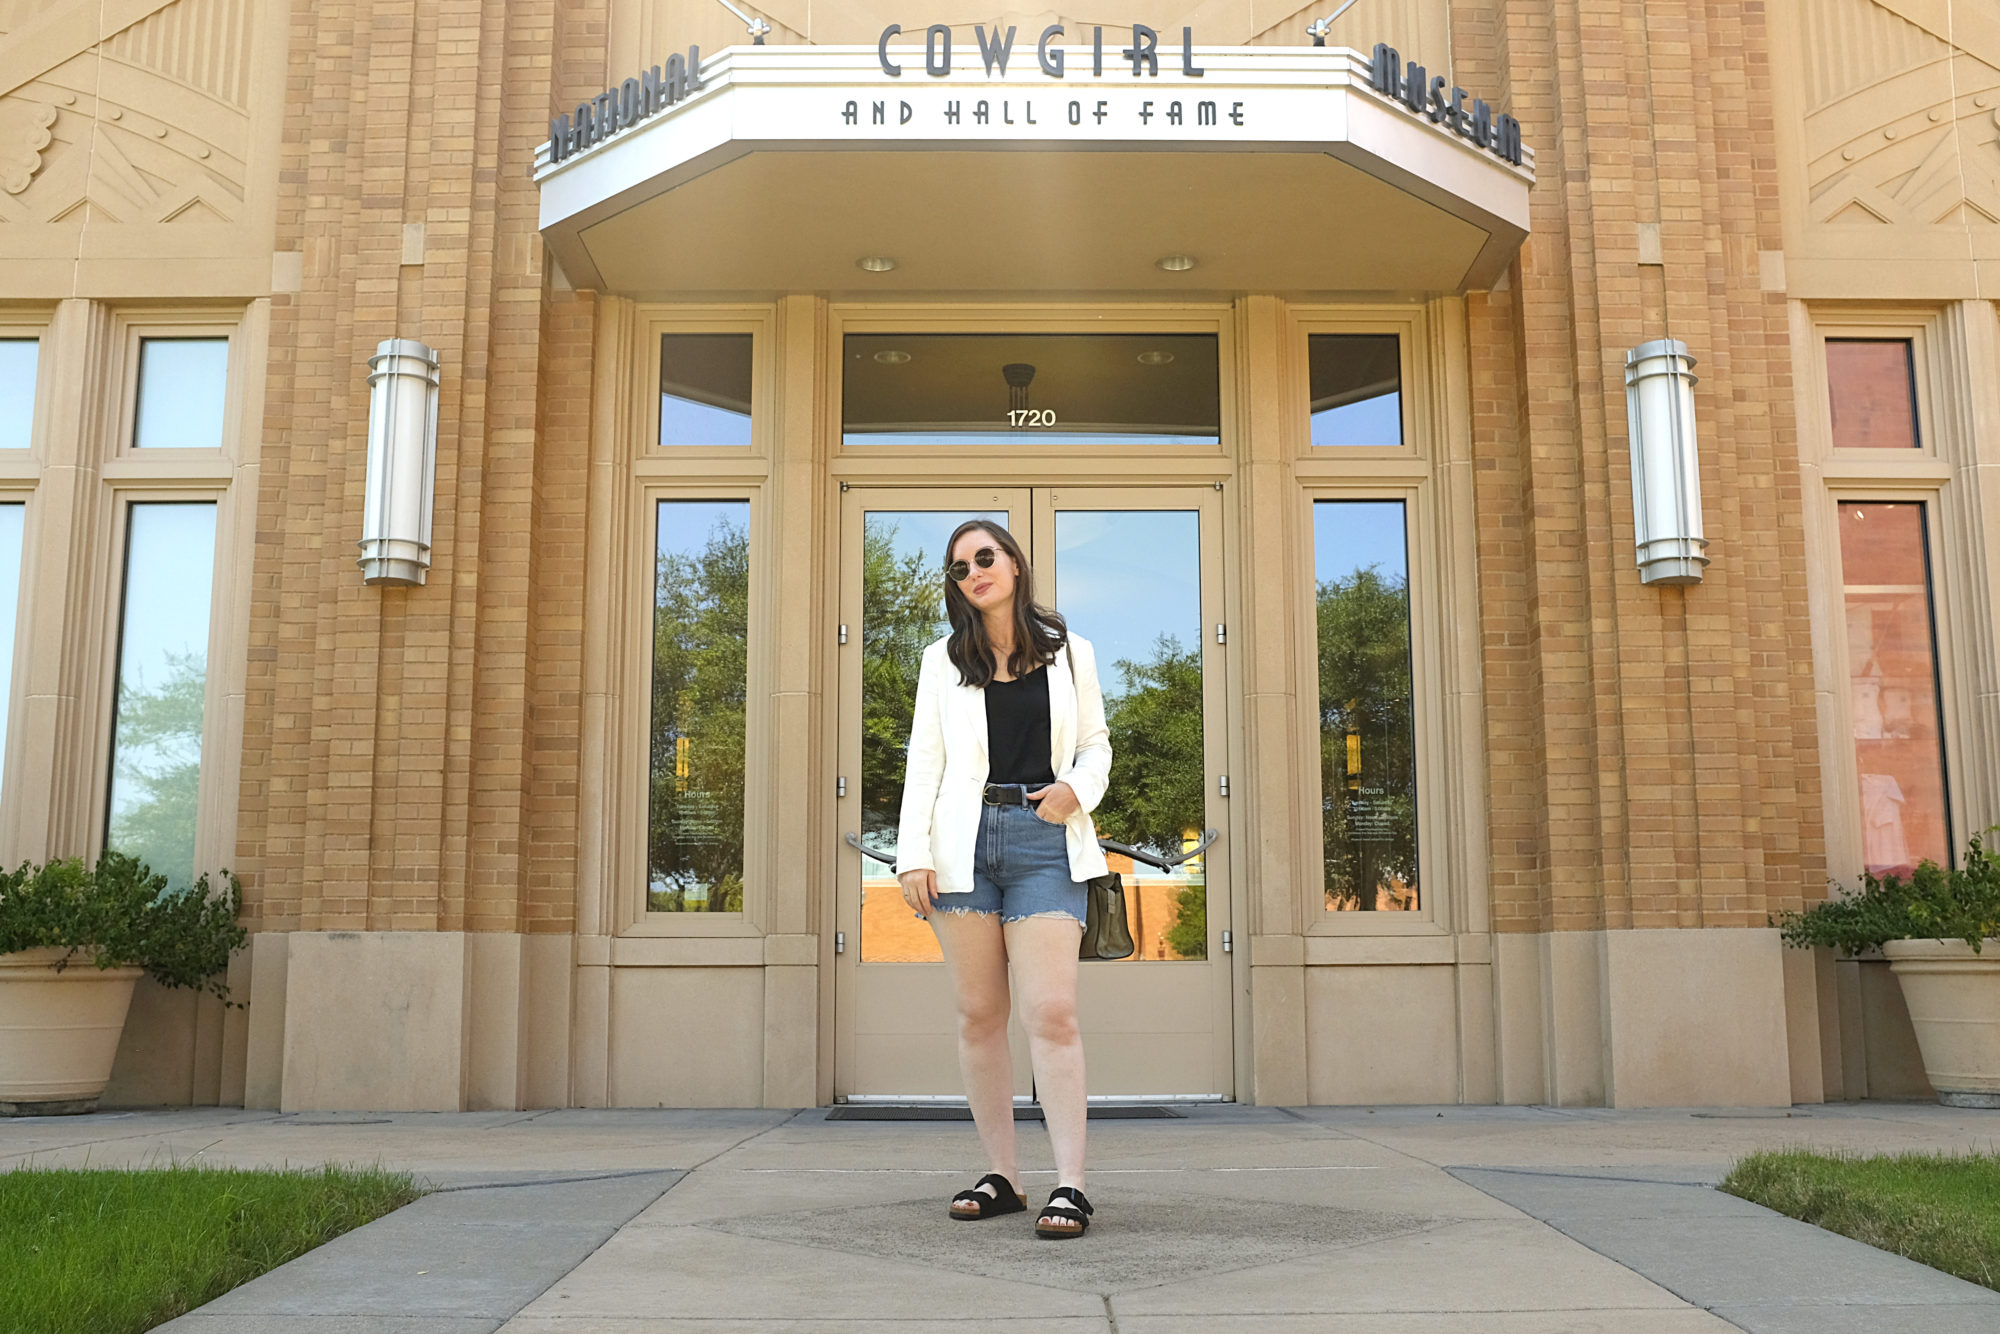 Alyssa stands in front of the Cowgirl Museum in Fort Worth